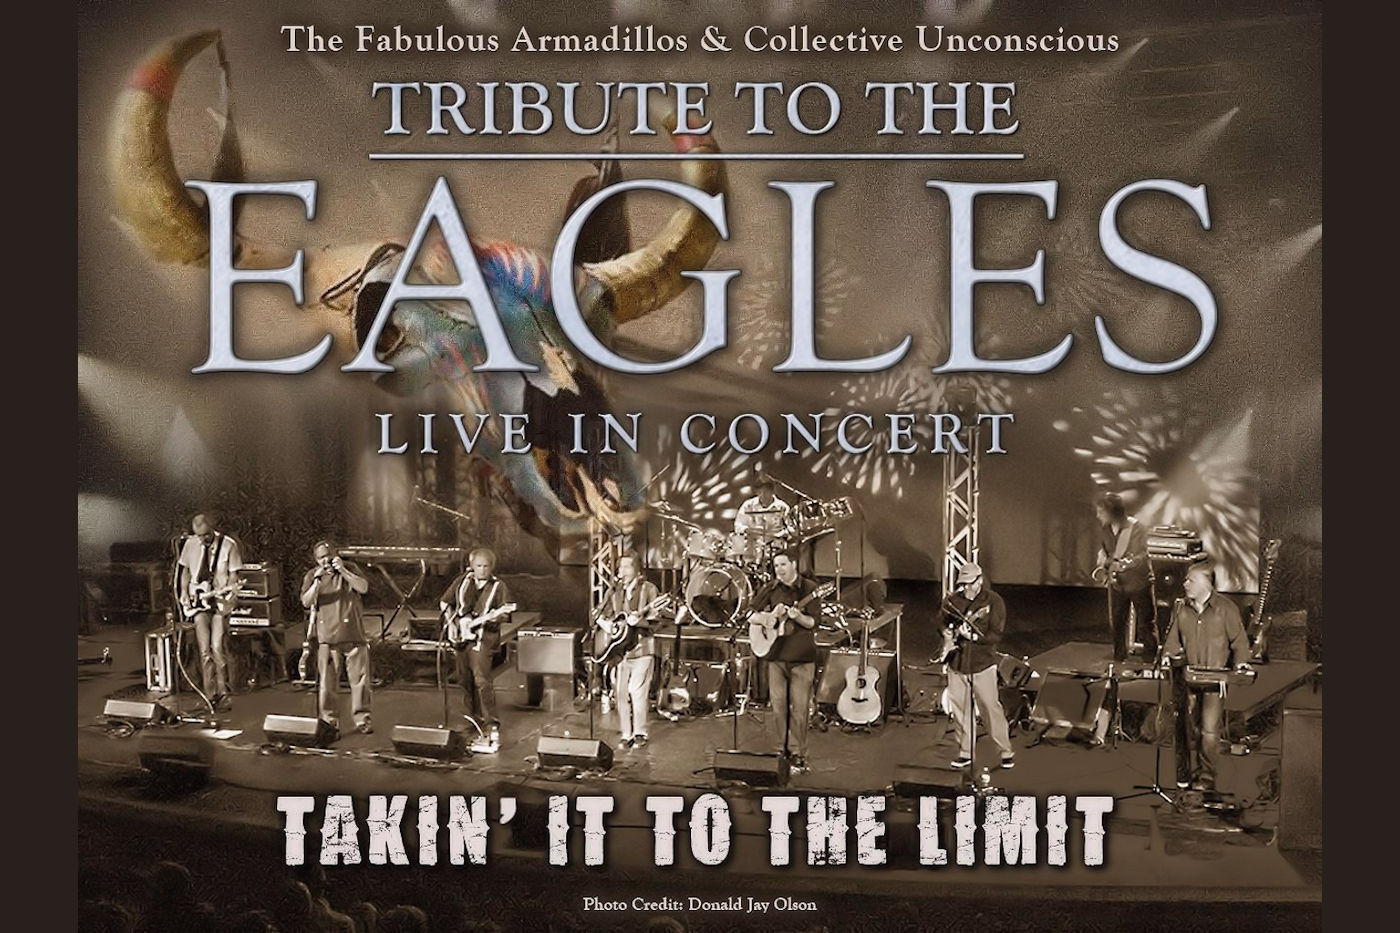 Takin' It to the Limit: An Eagles Tribute at the Historic Holmes Theatre by The Fabulous Armadillos